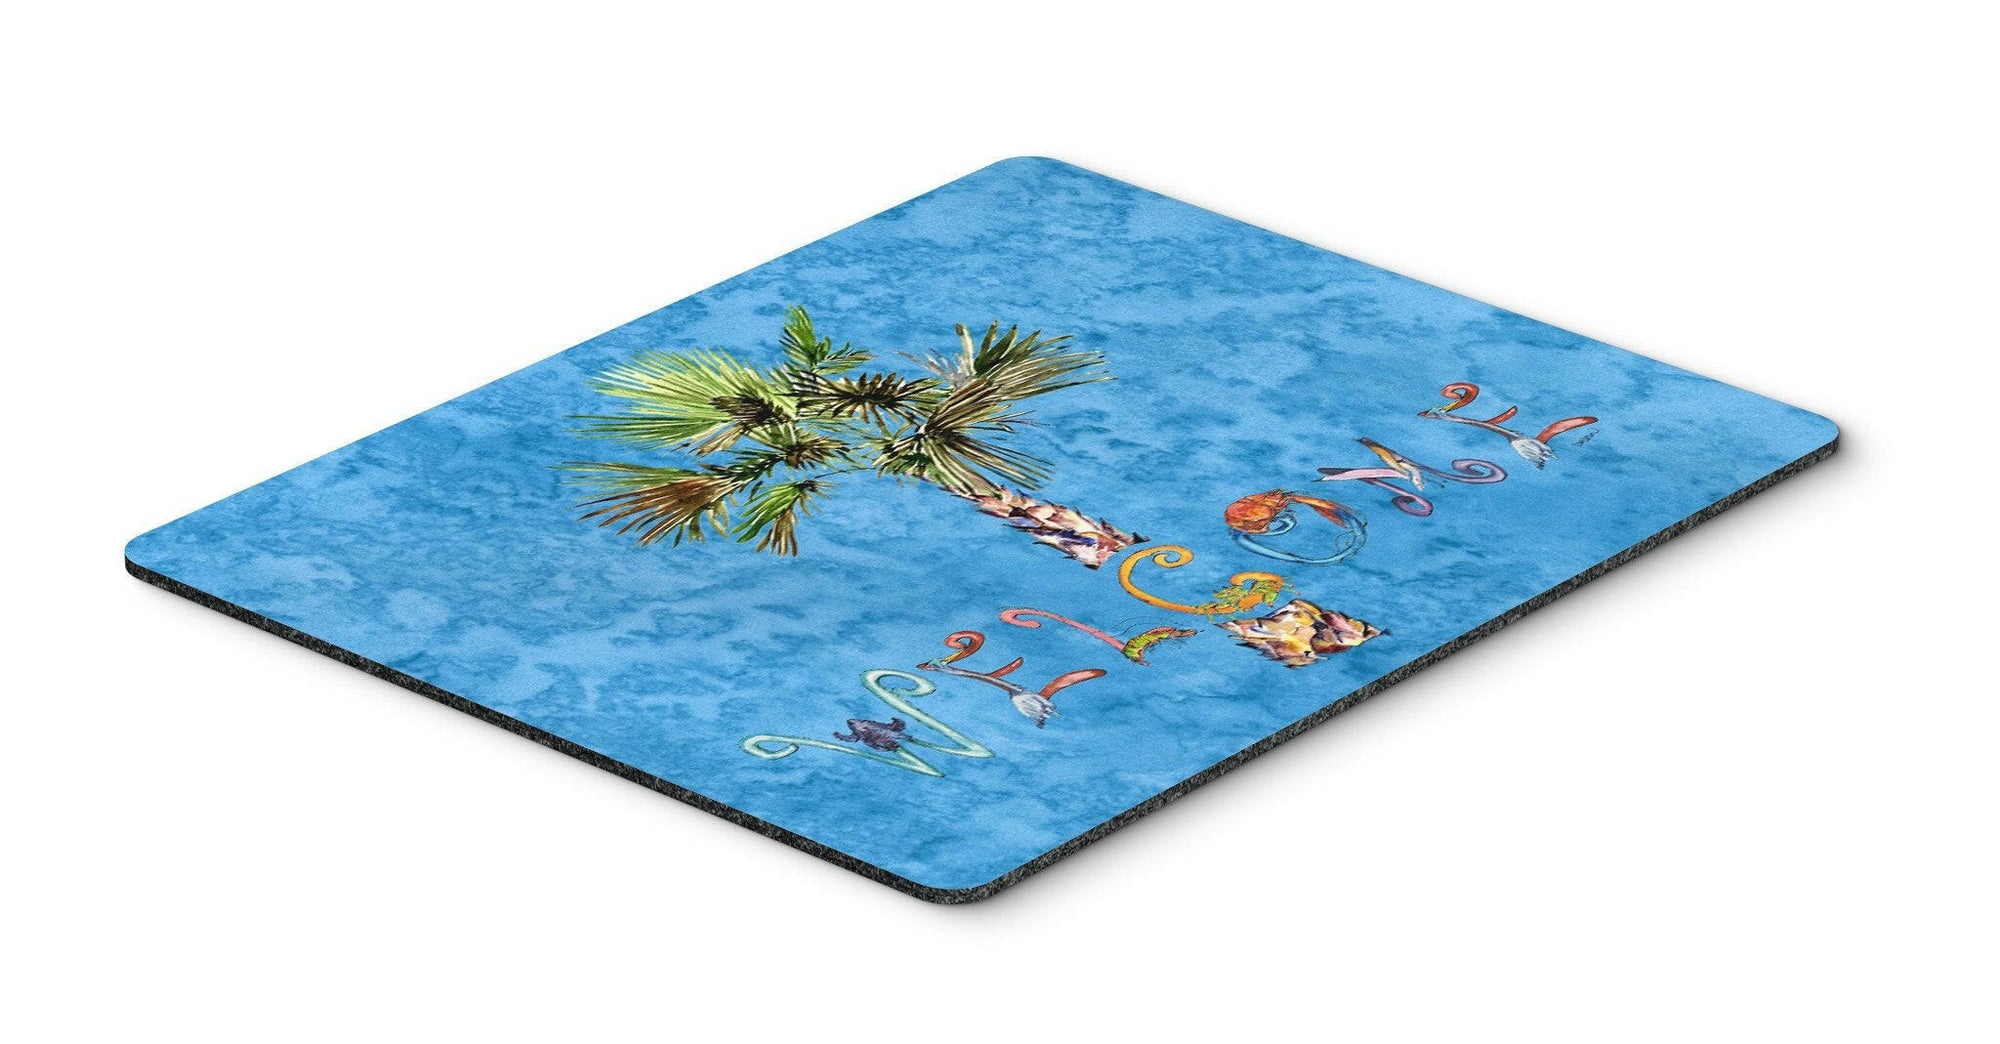 Welcome Palm Tree on Blue Mouse Pad, Hot Pad or Trivet 8708MP by Caroline's Treasures